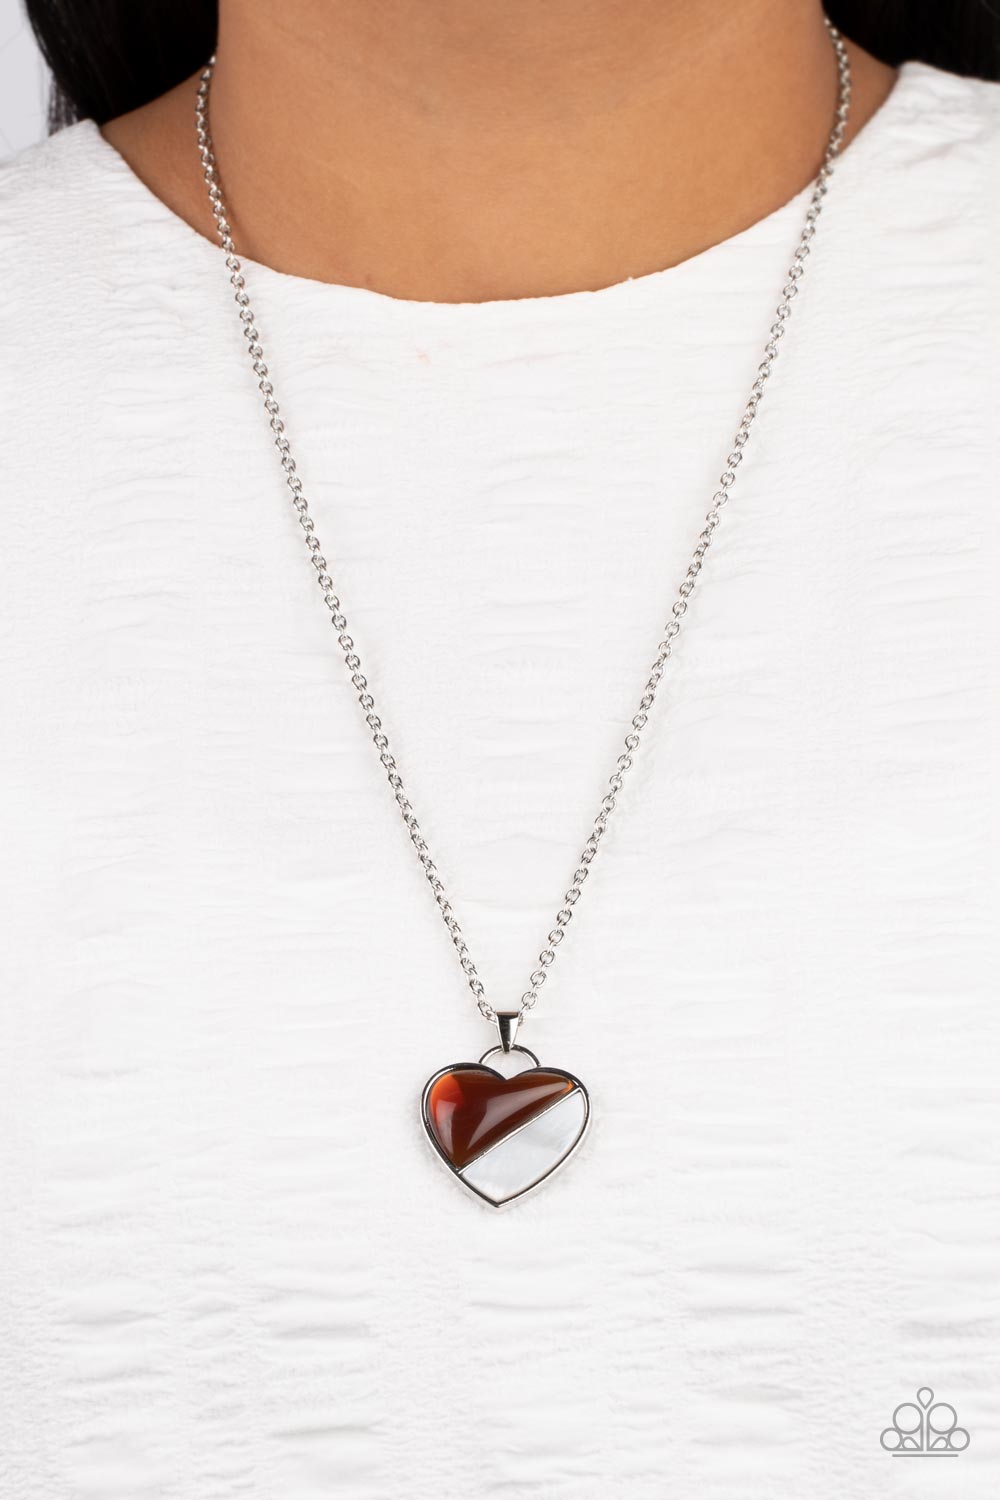 Nautical Romance Brown Heart Necklace - Paparazzi Accessories- lightbox - CarasShop.com - $5 Jewelry by Cara Jewels